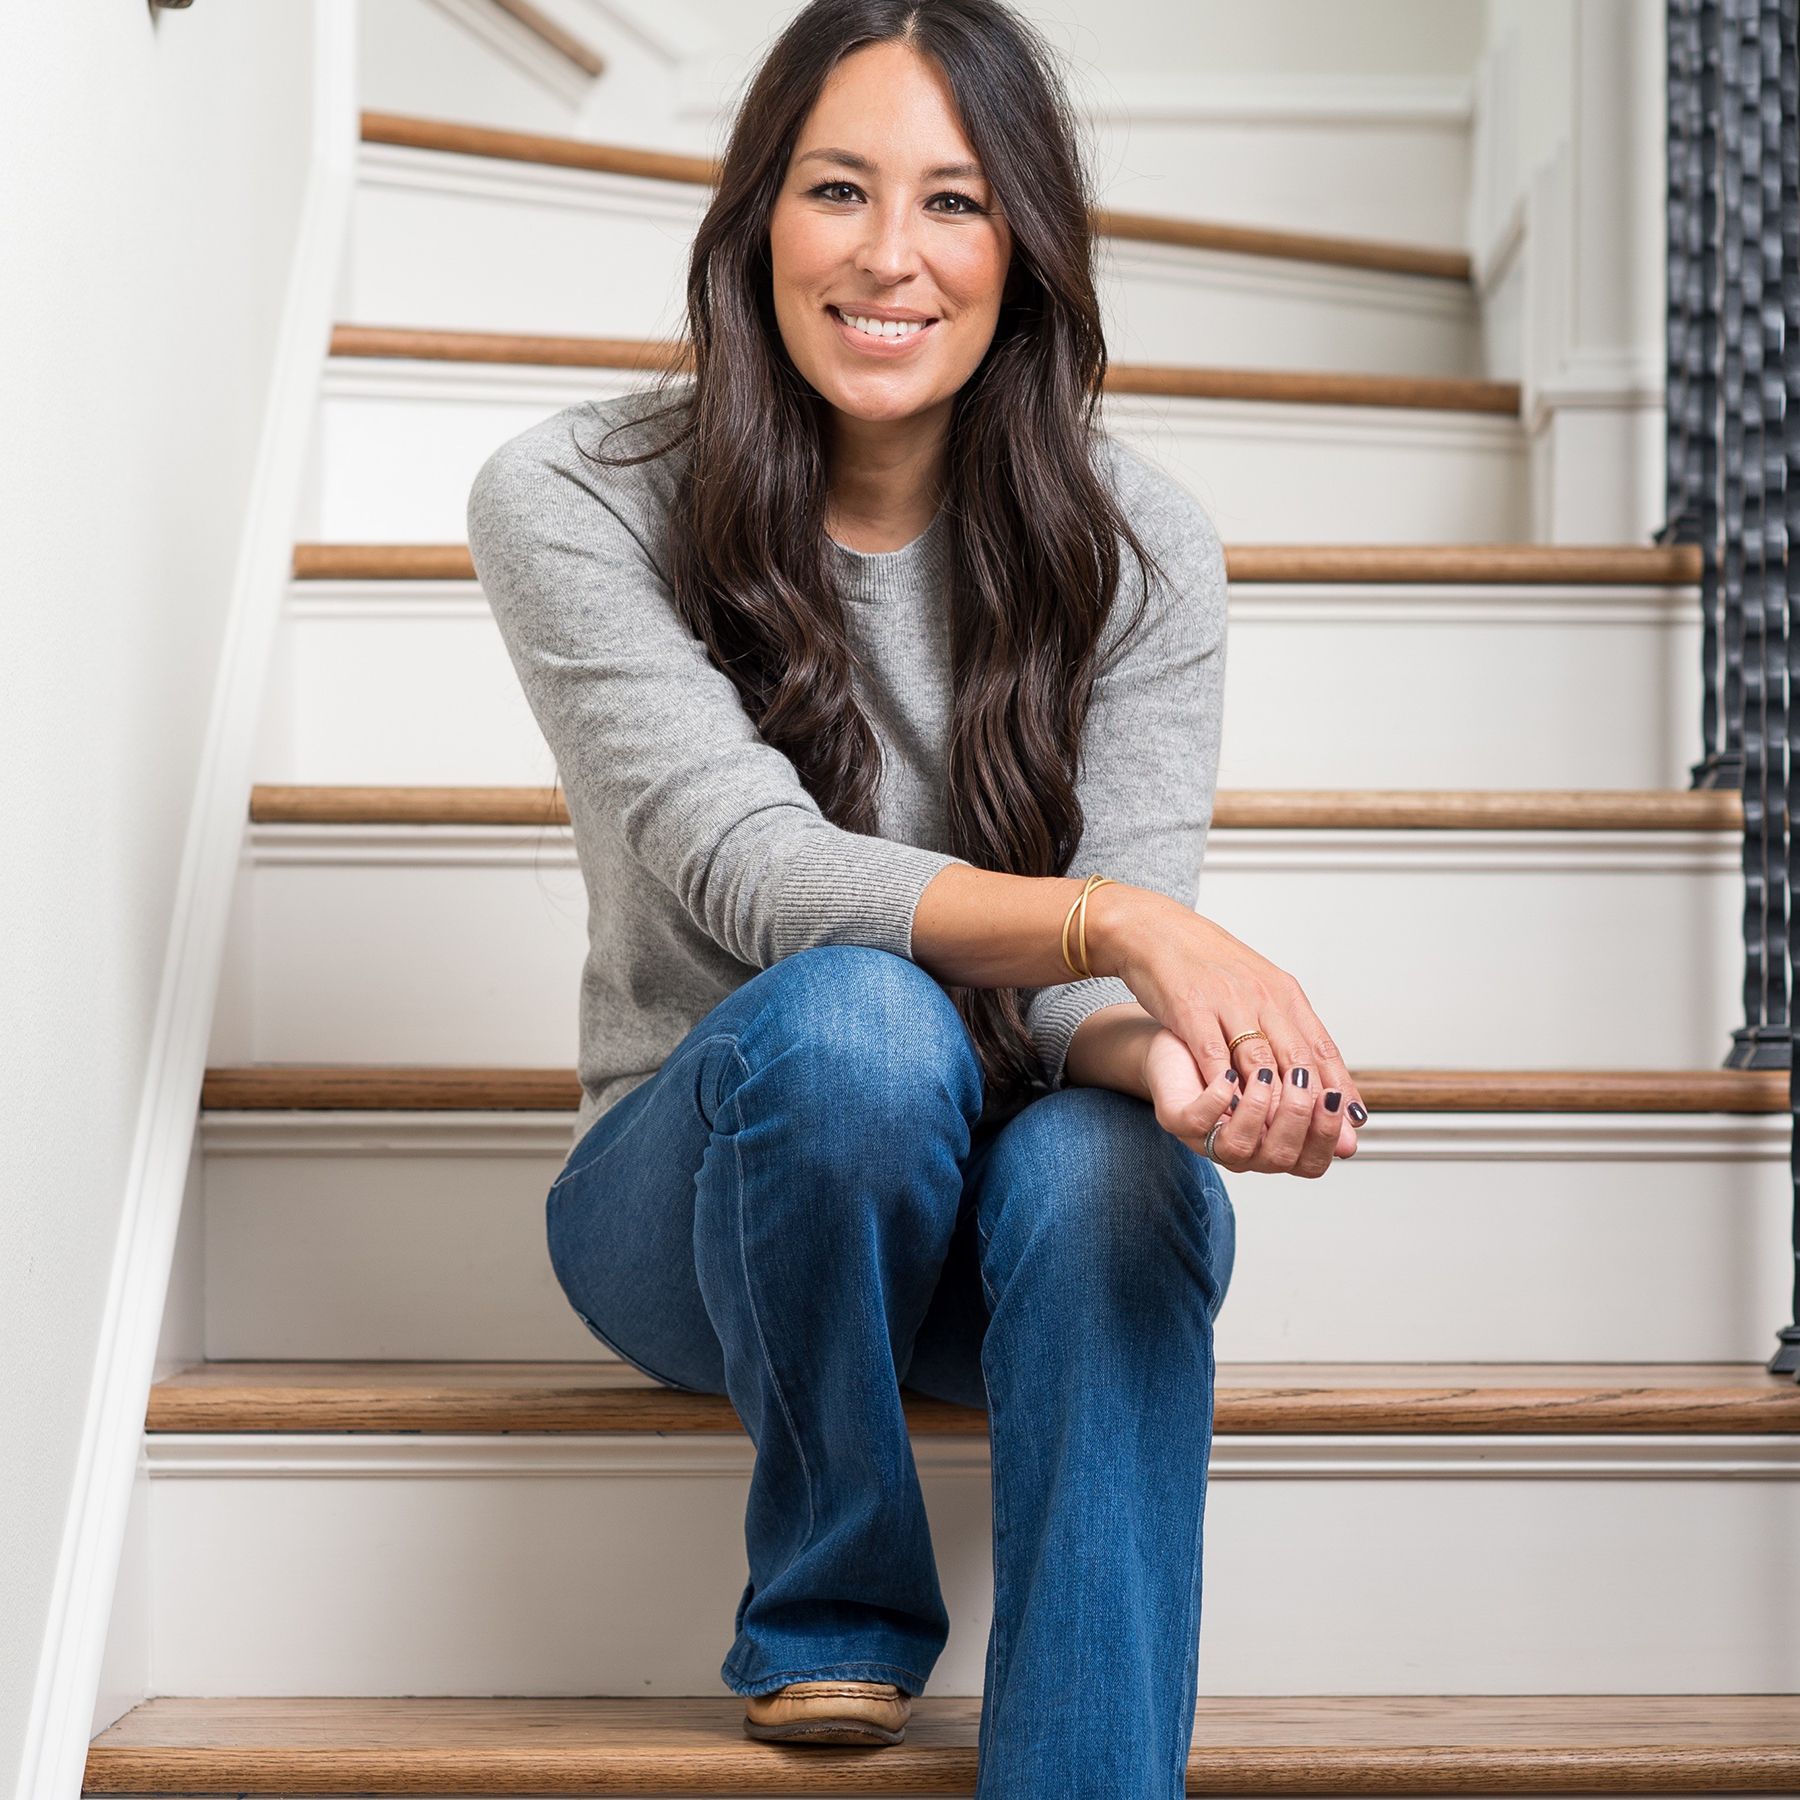 Joanna Gaines Talks the Pressures of Keeping a Perfect House While Raising Kids